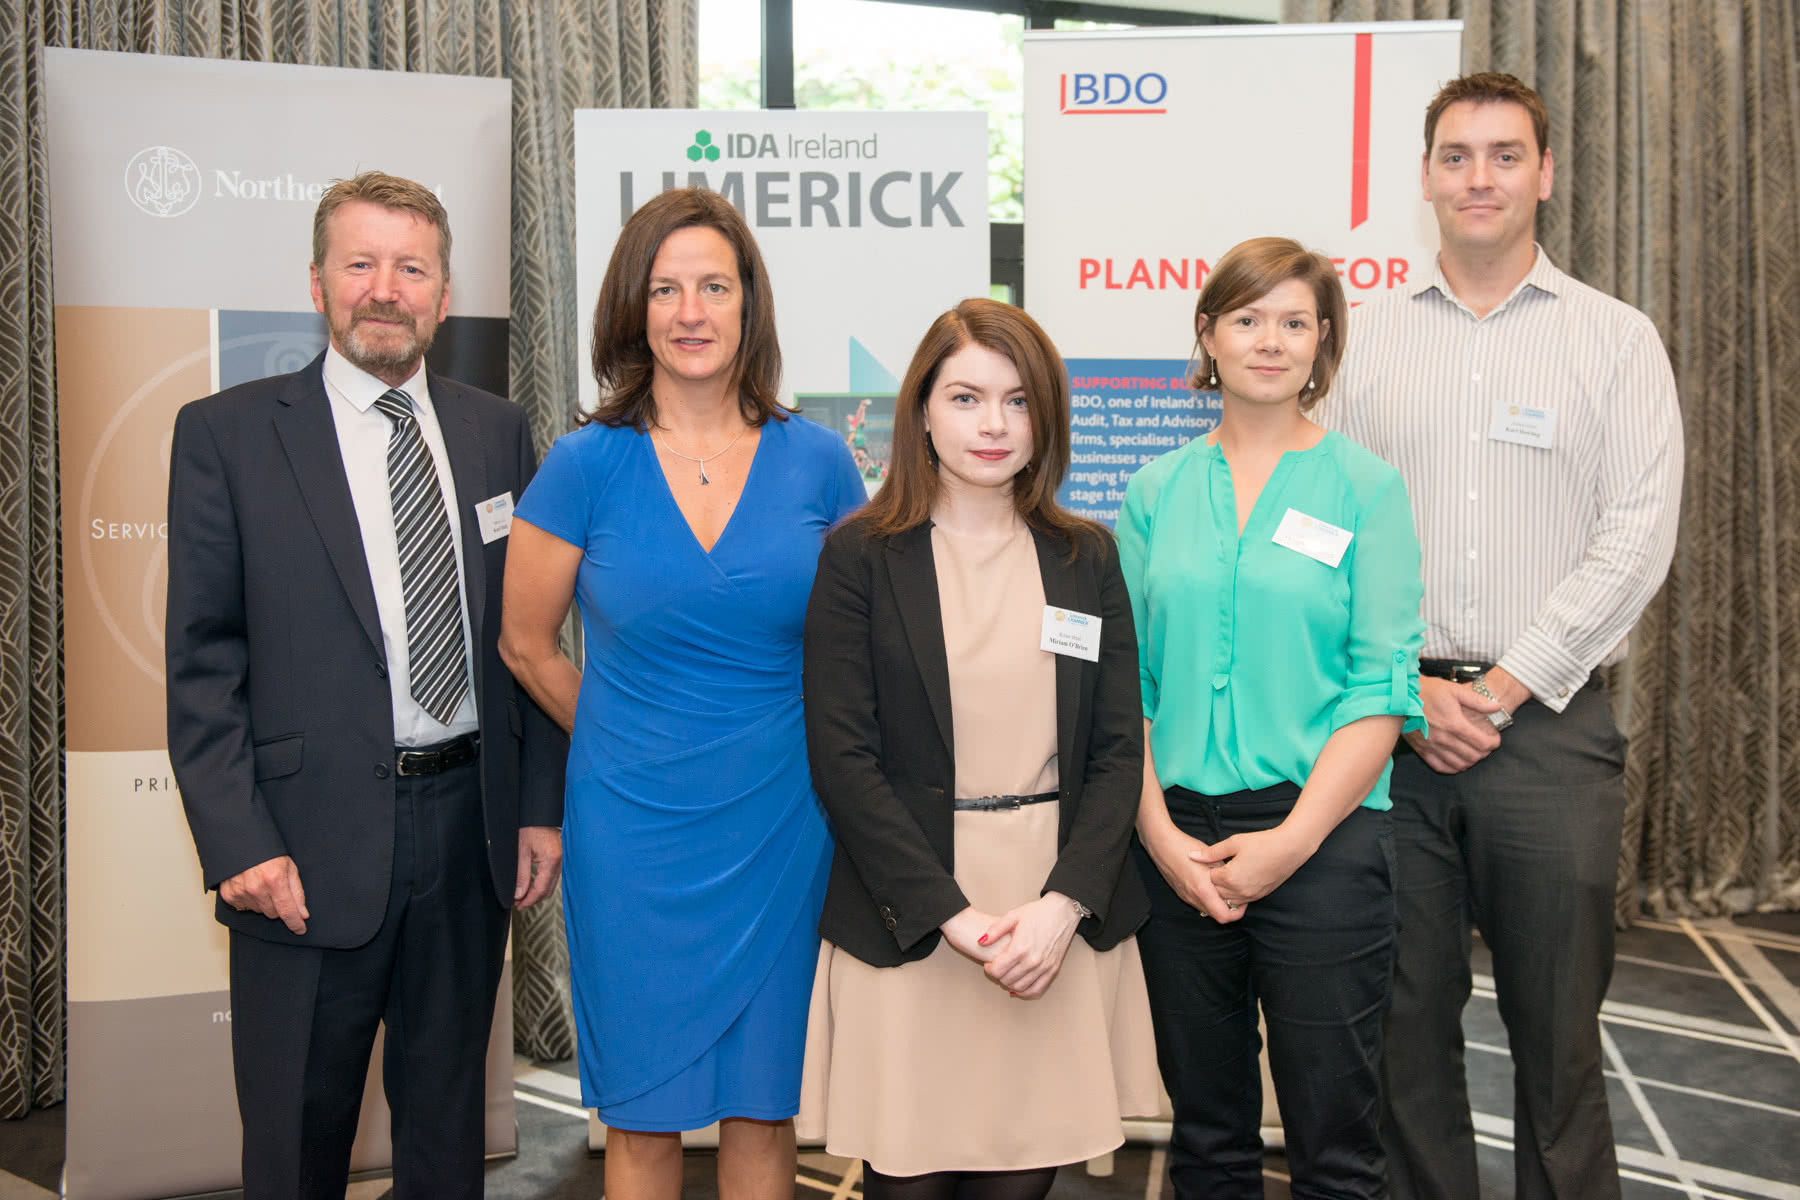 from left to right: Karl Daly, Metis Life, Mary Shine, University of Limerick , Miriam O'Brien, ActionPoint, Órlaith Borthwick, Limerick Chamber, Karl Dowling, ActionPoint